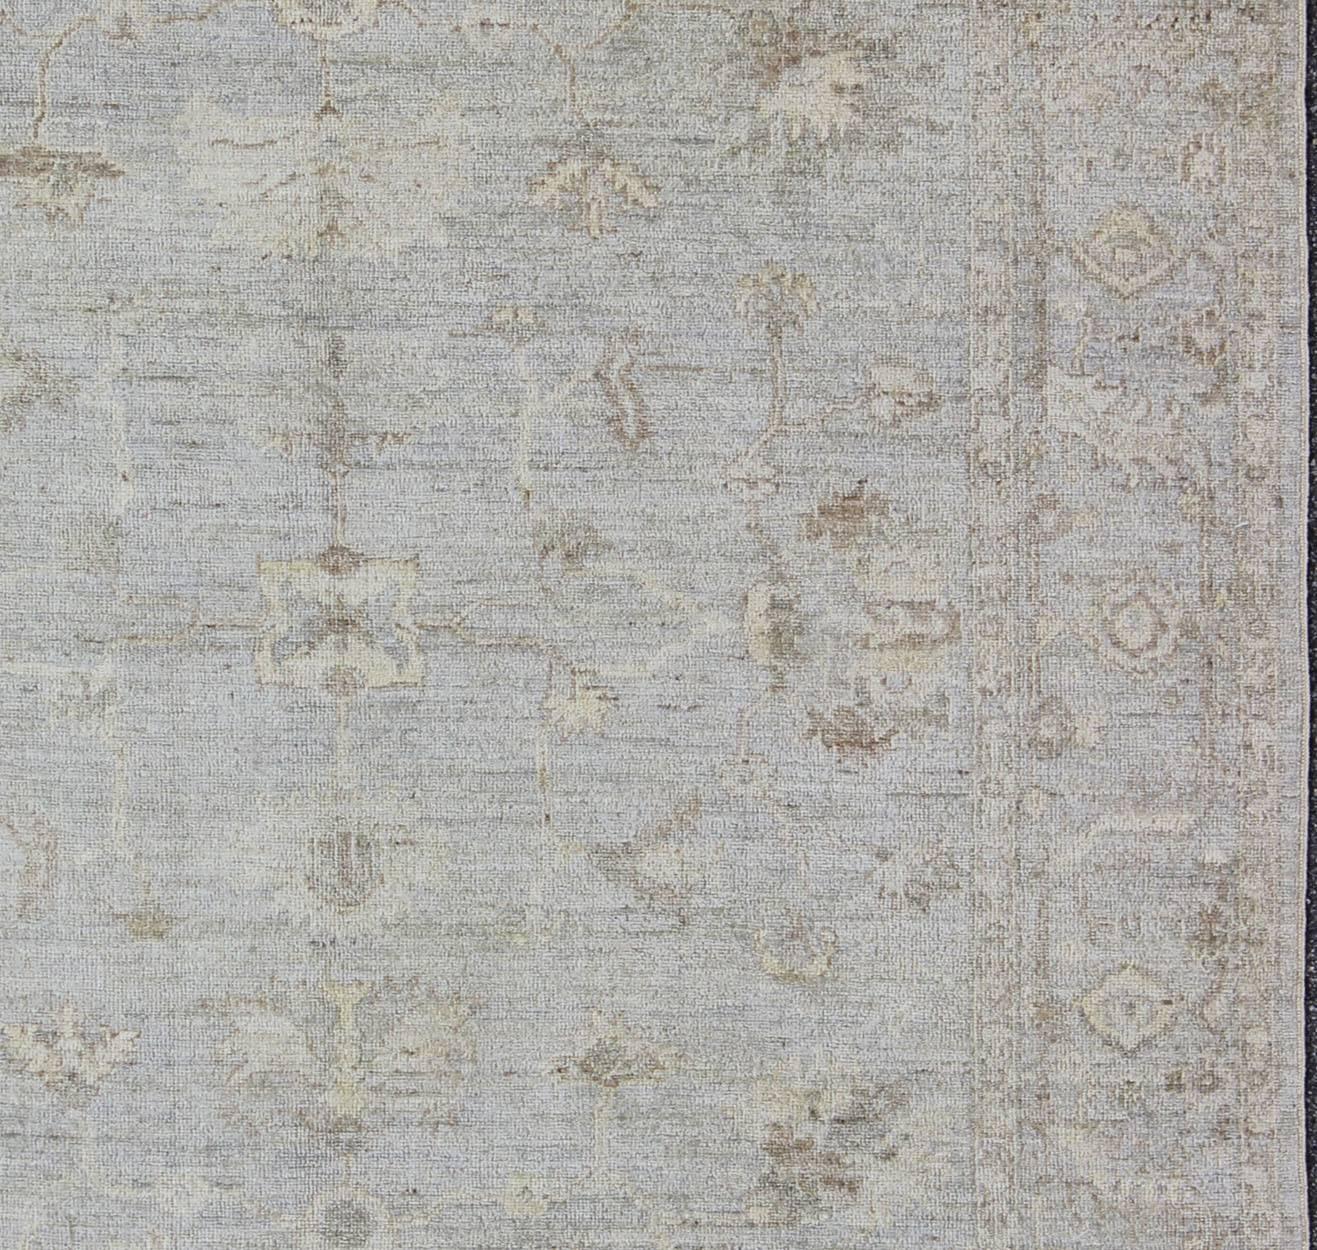 Made with a combination of angora and old wool, this magnificent Oushak boasts an all-over design in a large-scale style. The plentiful floral and bouquet motifs creates an open design which is surrounded by a border containing defined and geometric